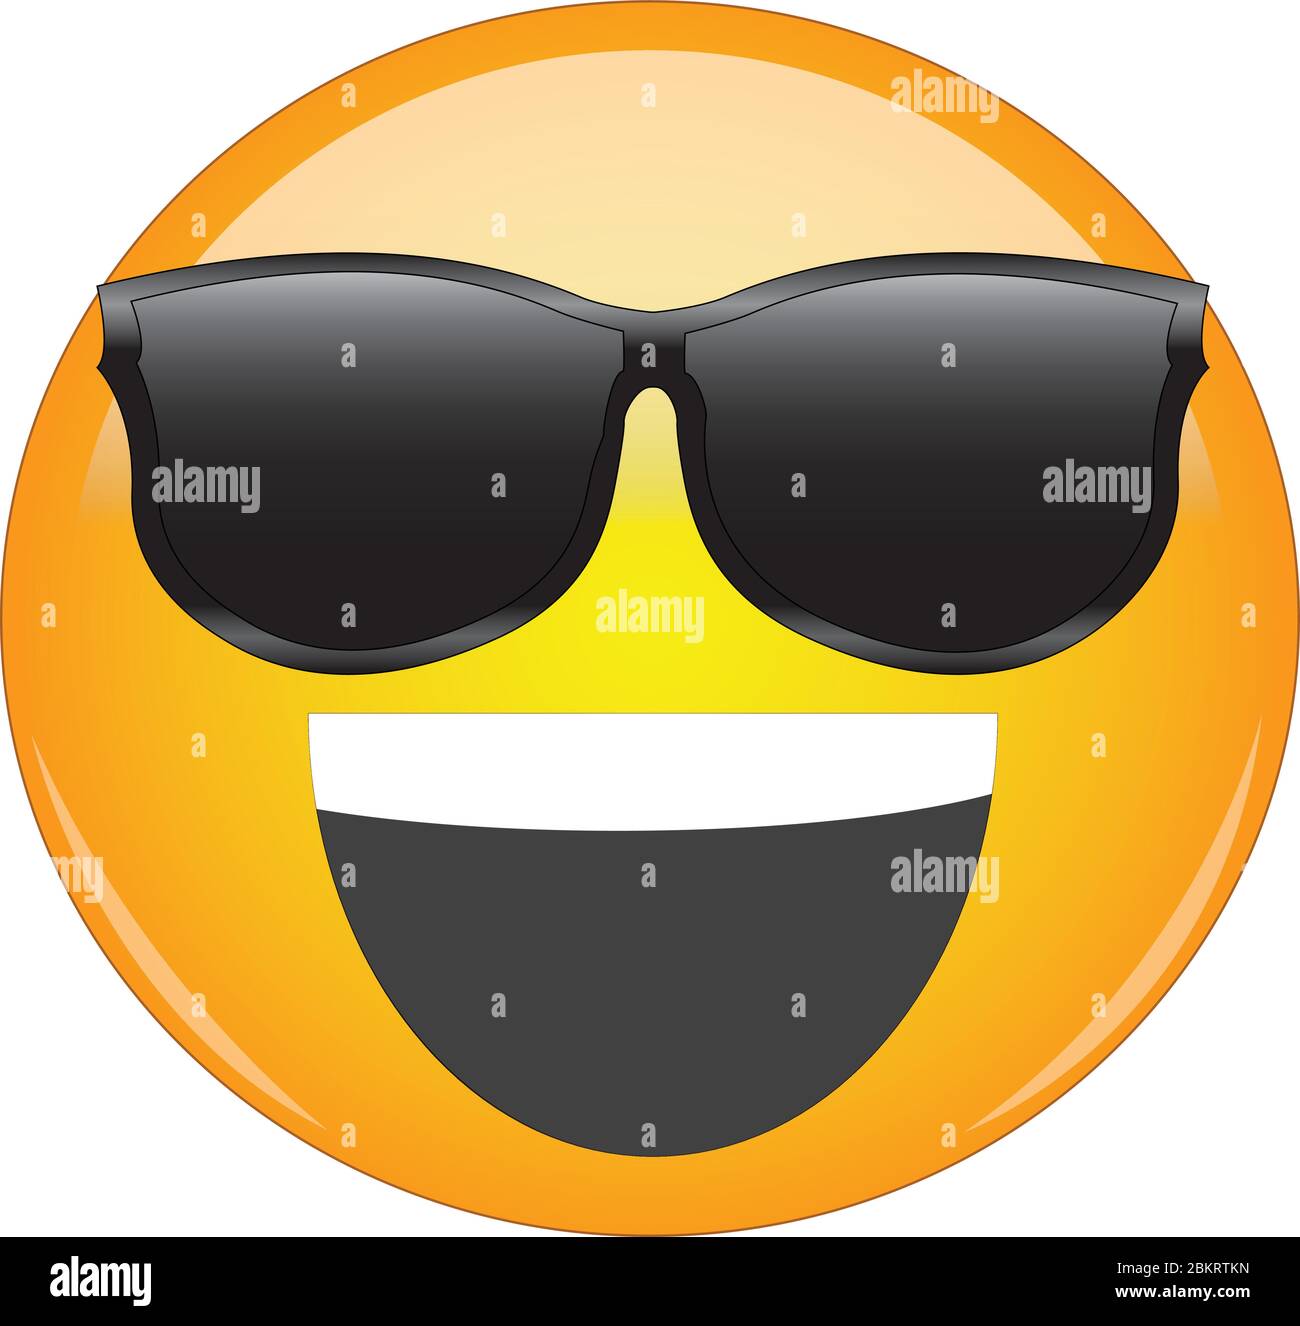 Cool happy grin yellow emoji. Smiling yellow face emoticon wearing sunglasses and having wide open smile on its face. Expression of being cool or awes Stock Vector